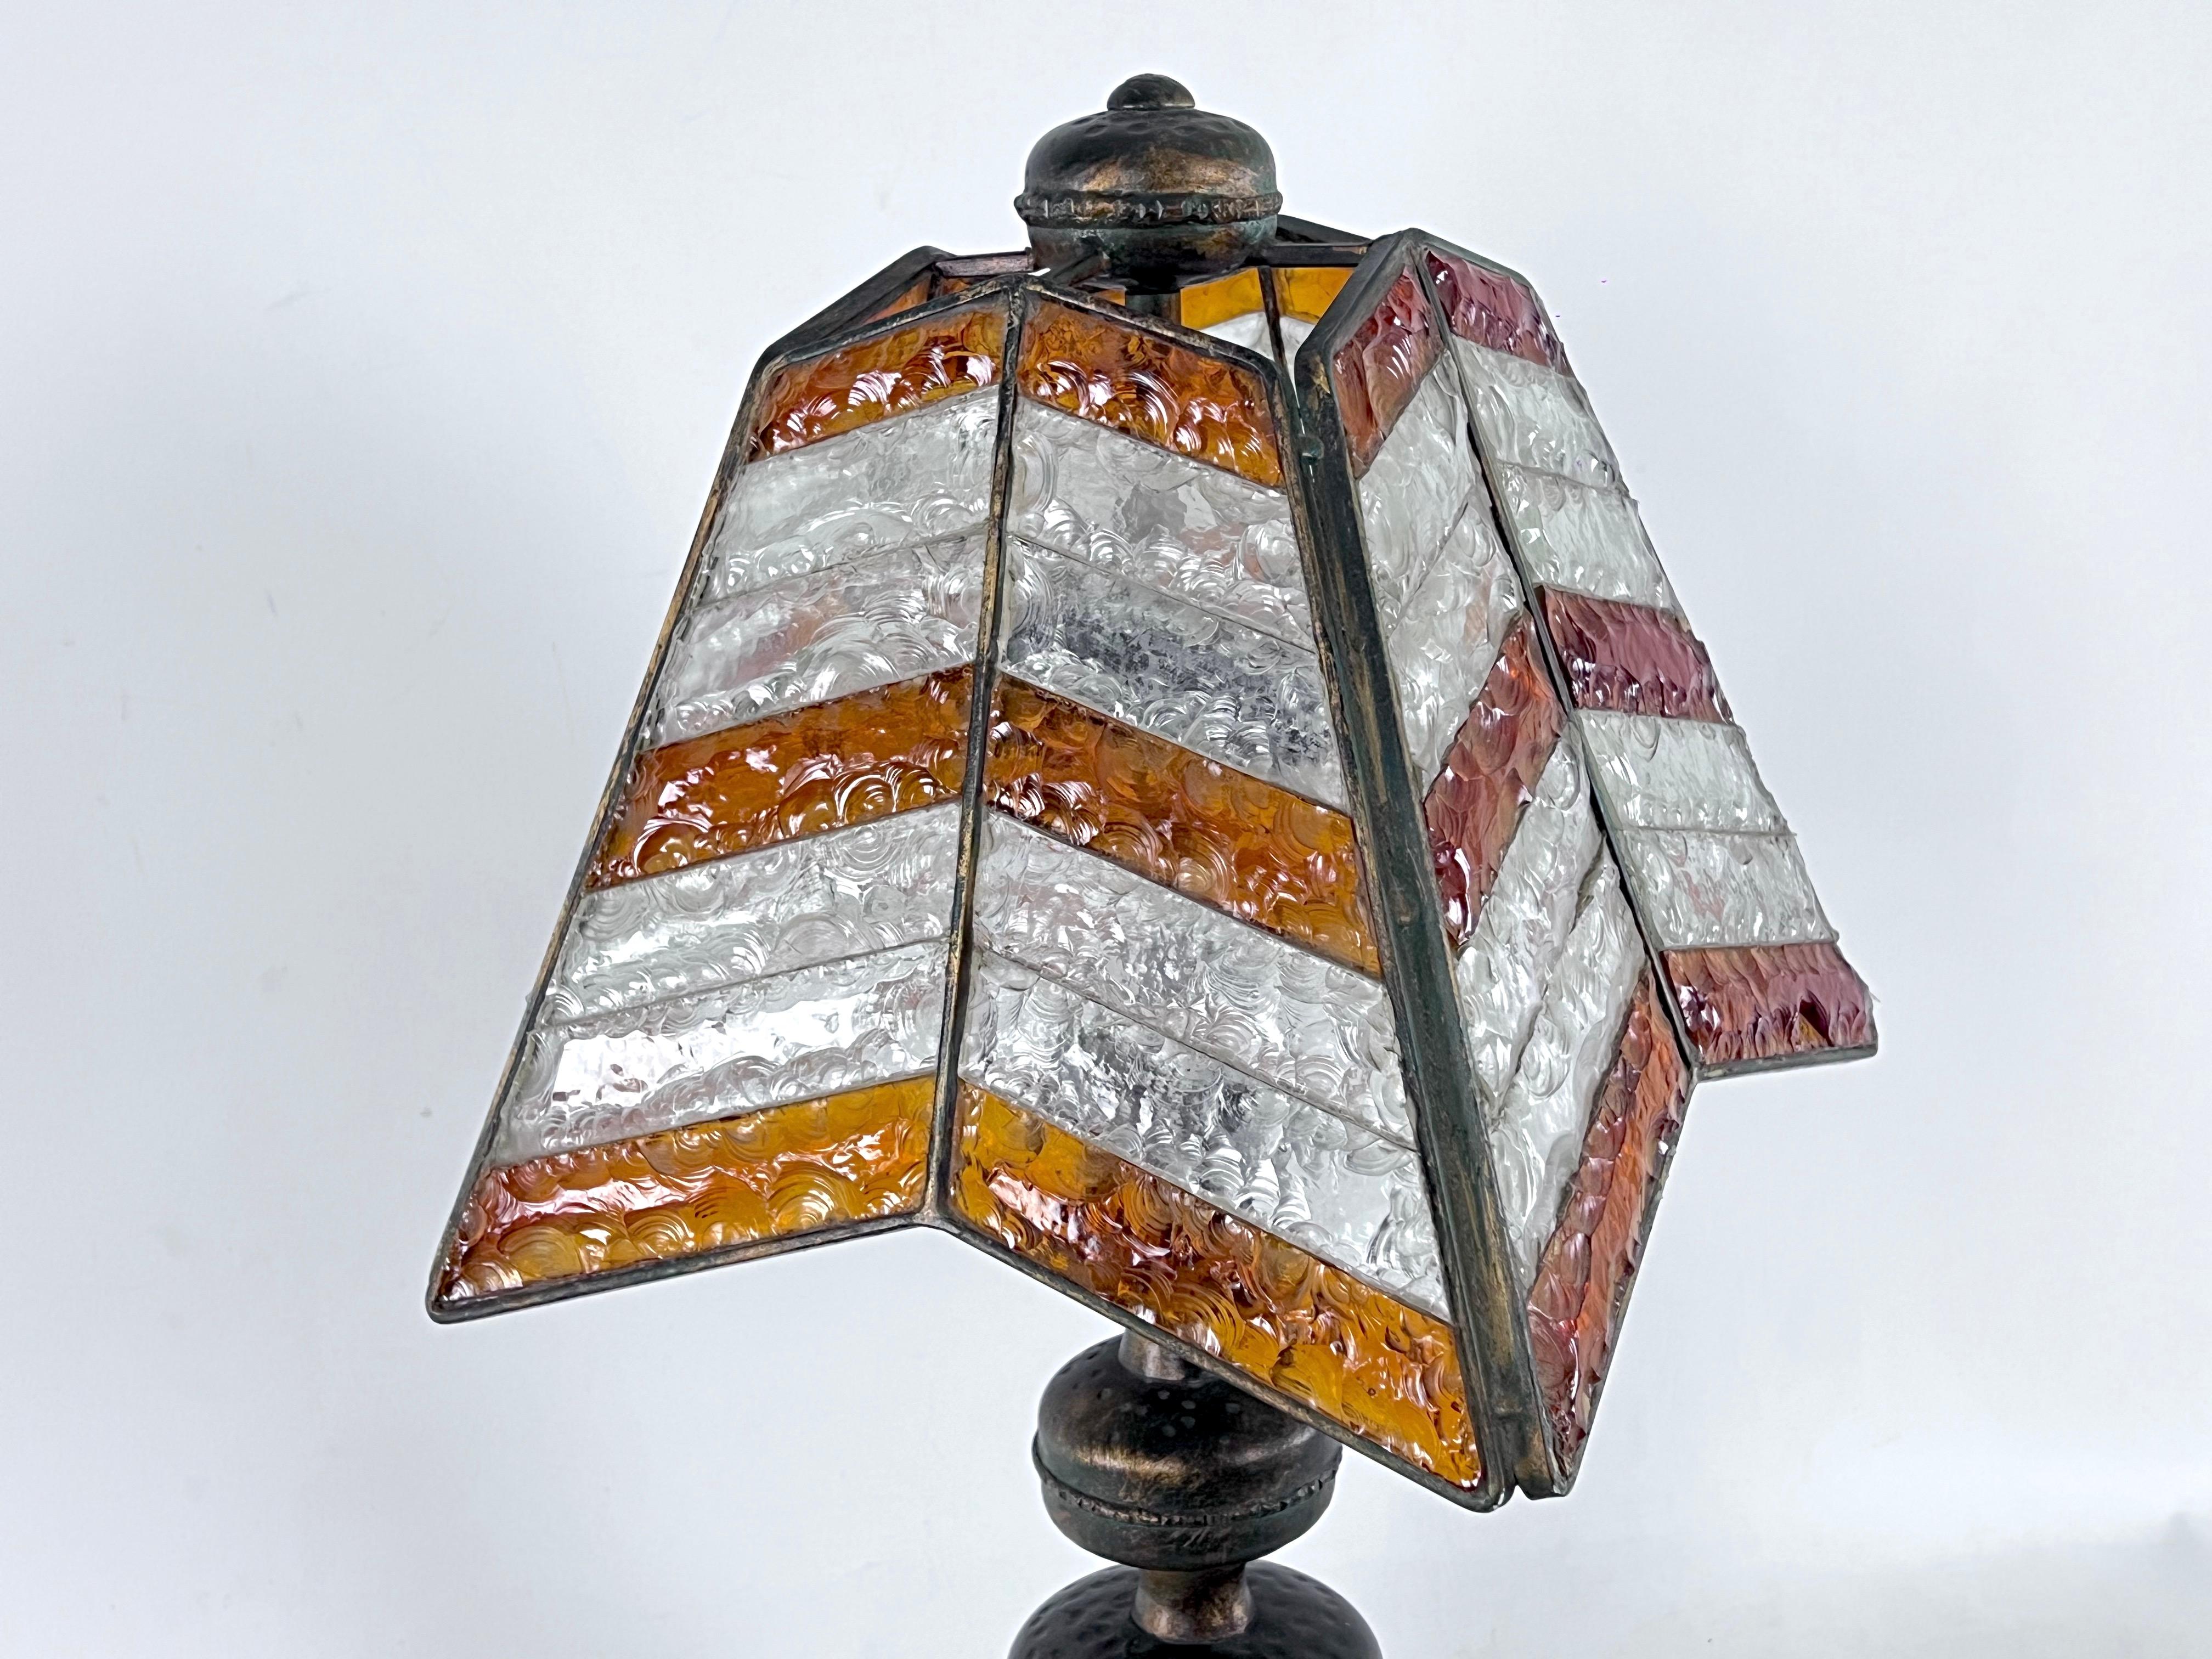 Monumental Brutalist Thick Glass and Metal Table Lamp by Longobard, Italy, 1970s For Sale 5